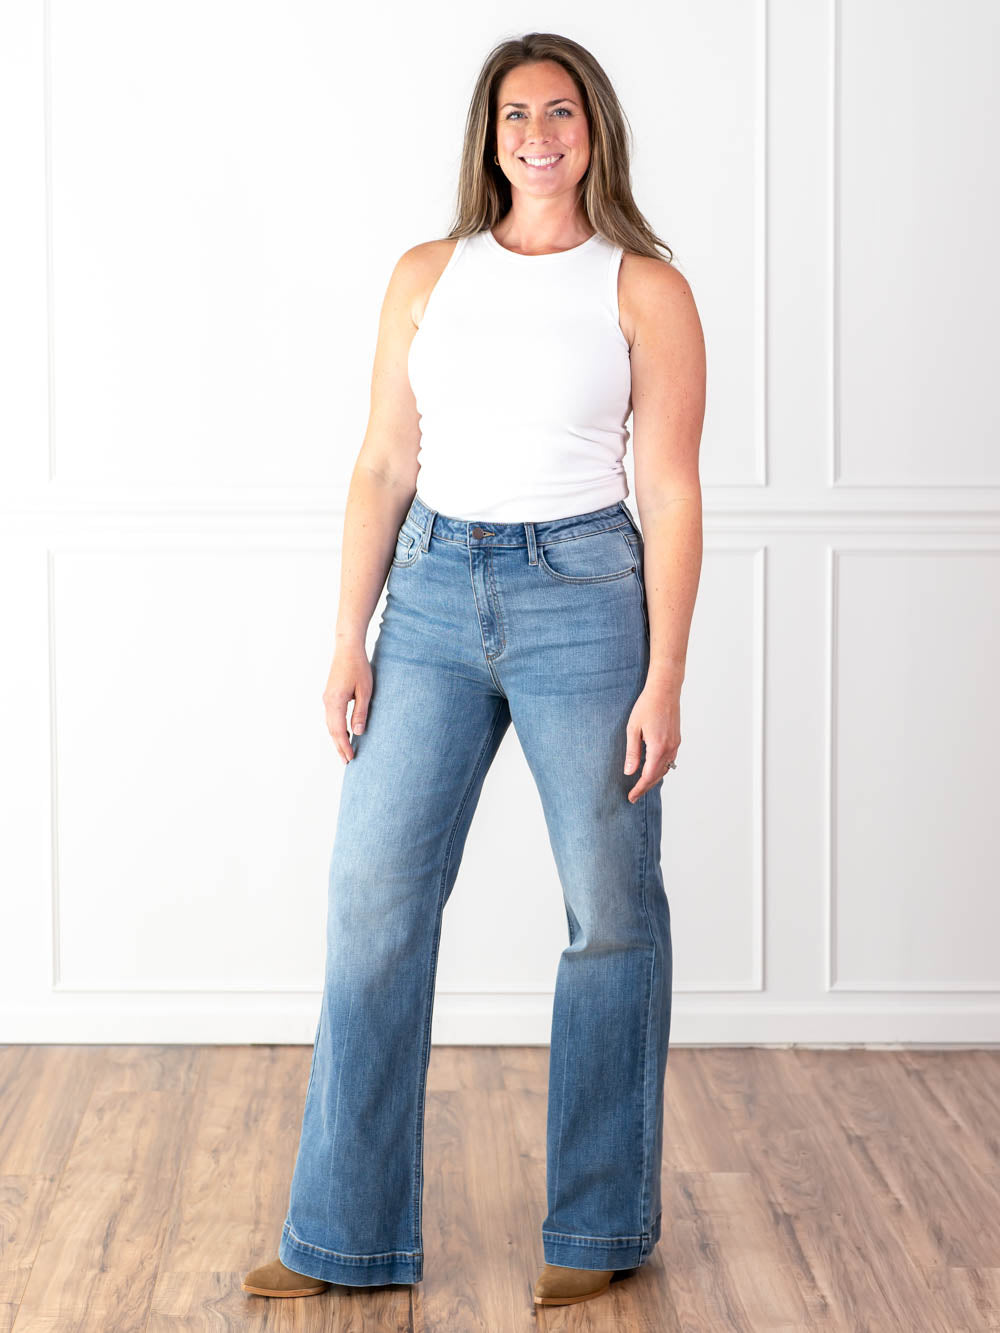 Jeans for Tall Women, Tall Girl Friendly